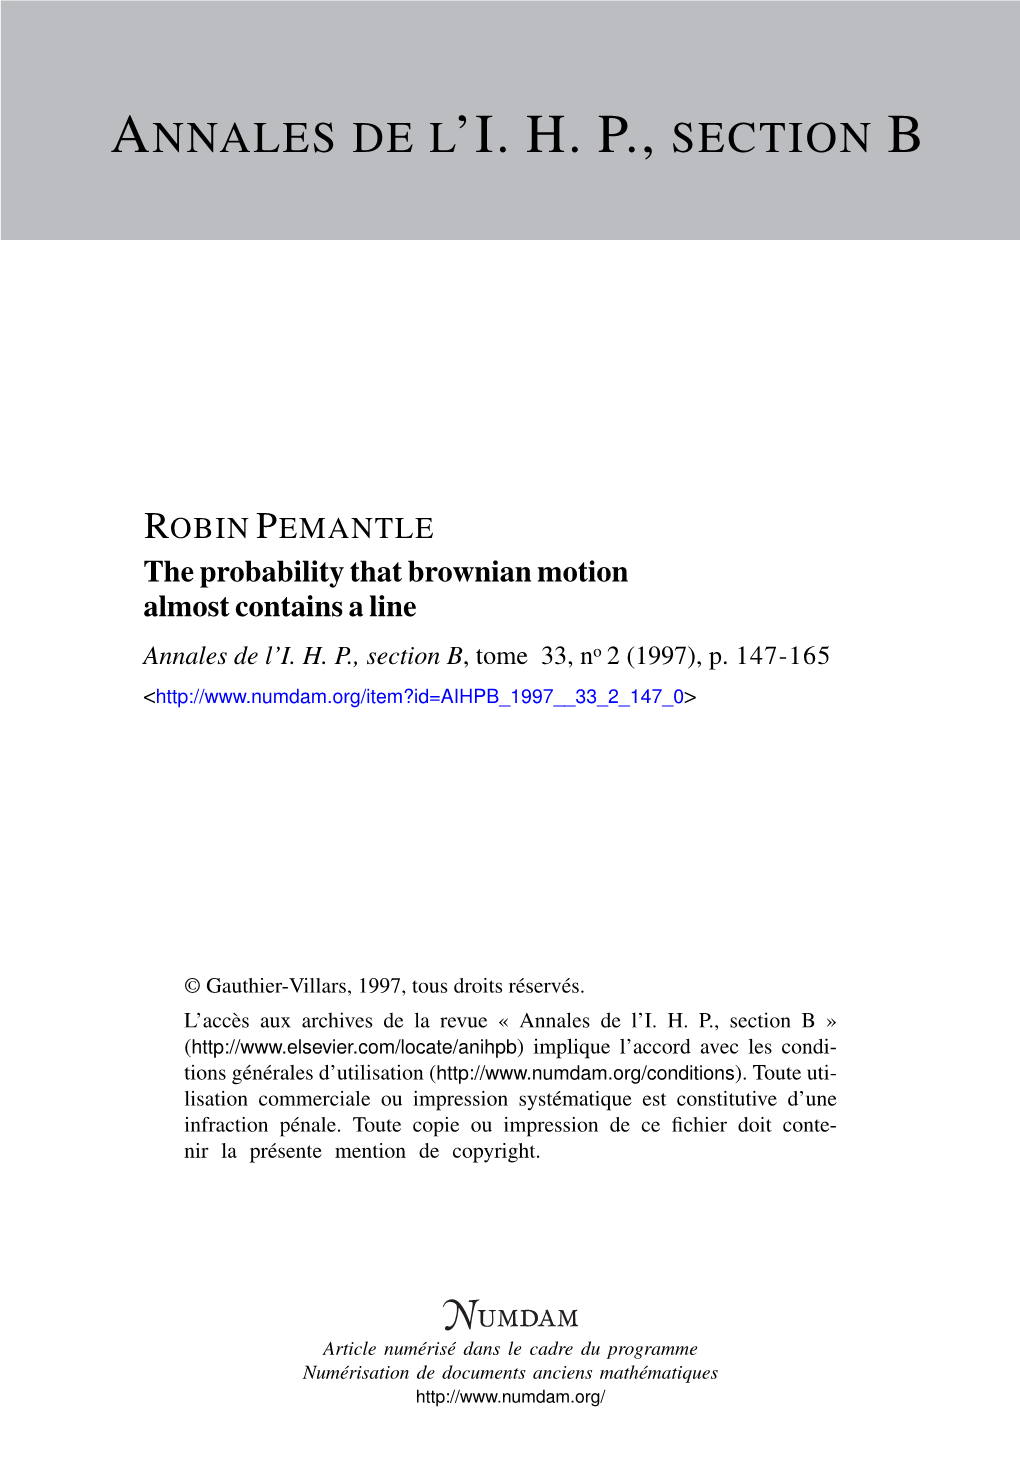 The Probability That Brownian Motion Almost Contains a Line Annales De L’I